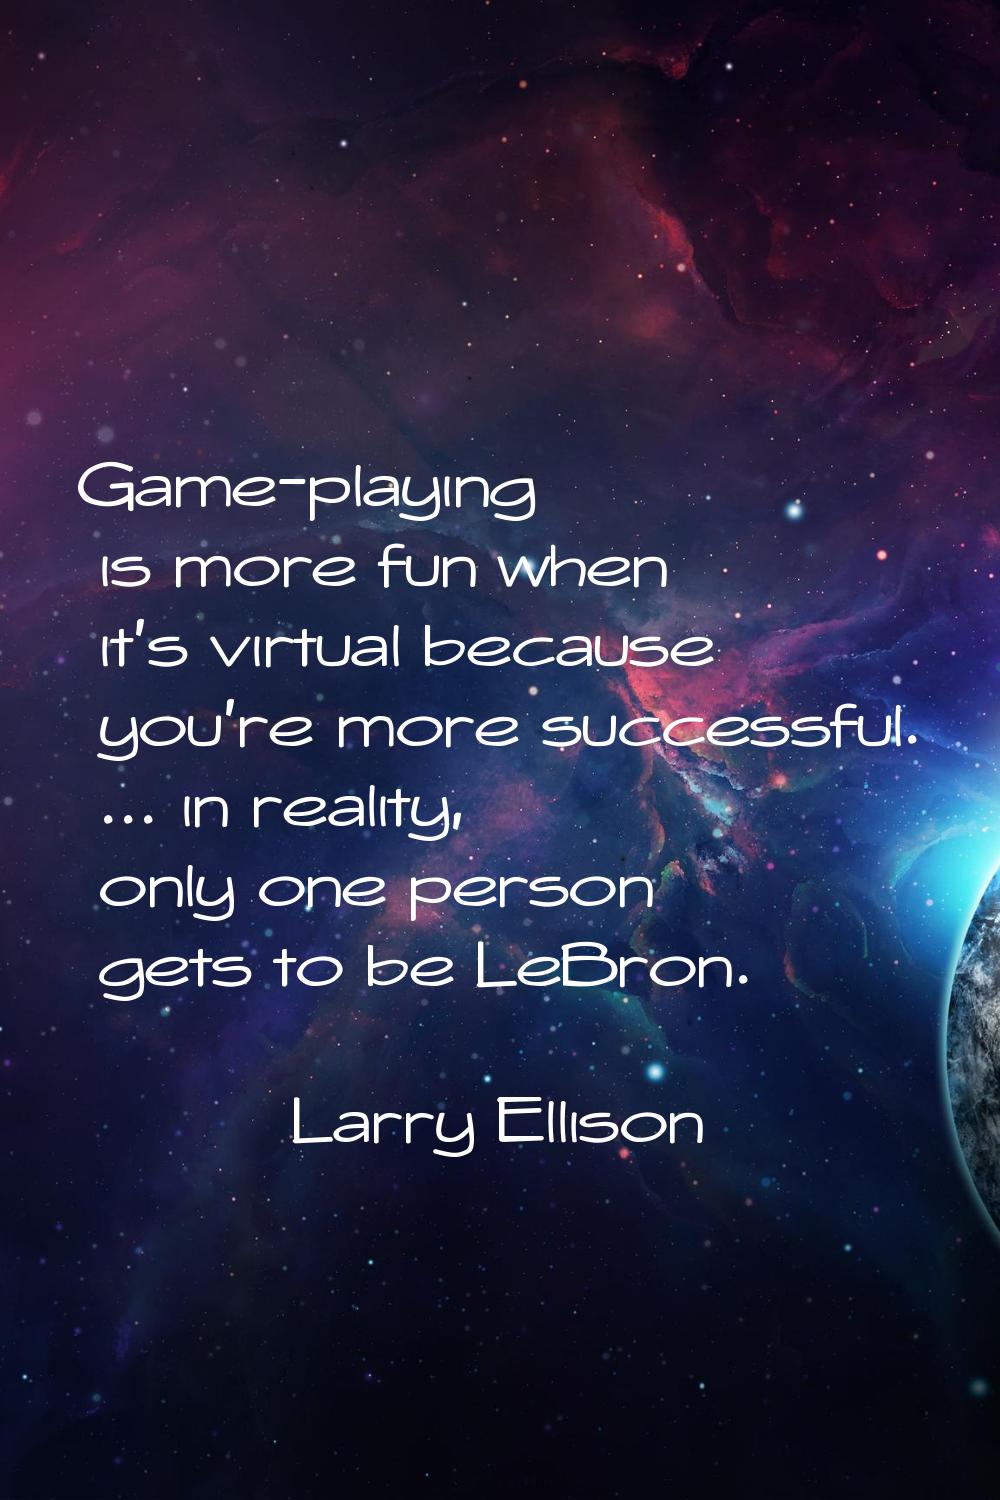 Game-playing is more fun when it's virtual because you're more successful. ... in reality, only one